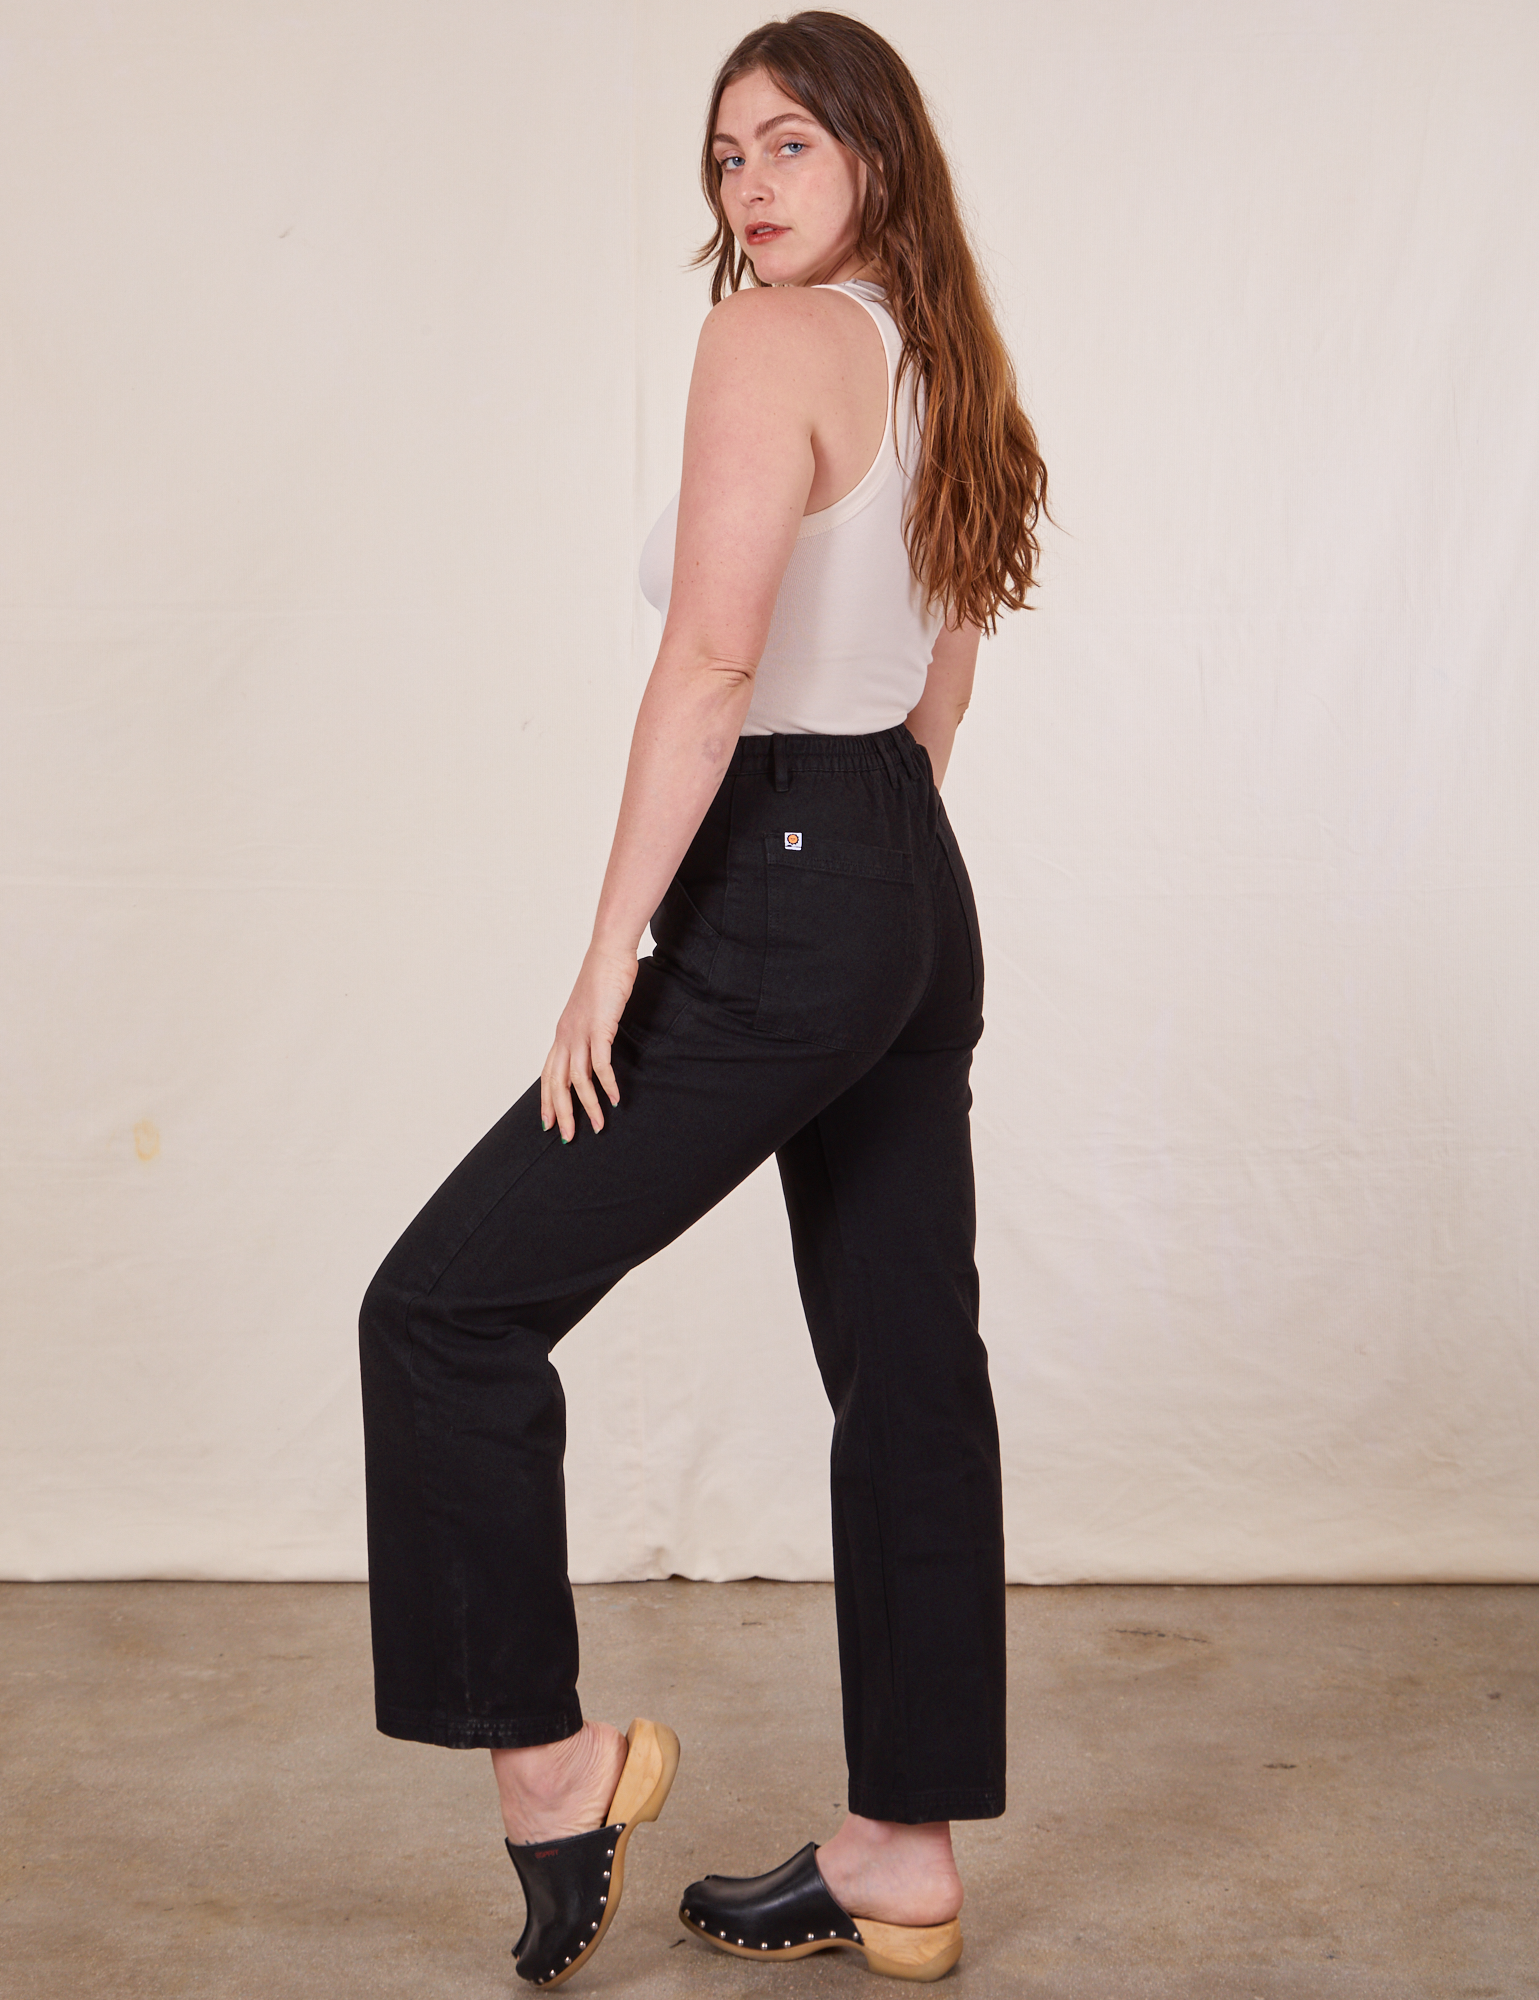 Work Pants in Basic Black side view on Allison wearing a Tank Top in vintage tee off-white